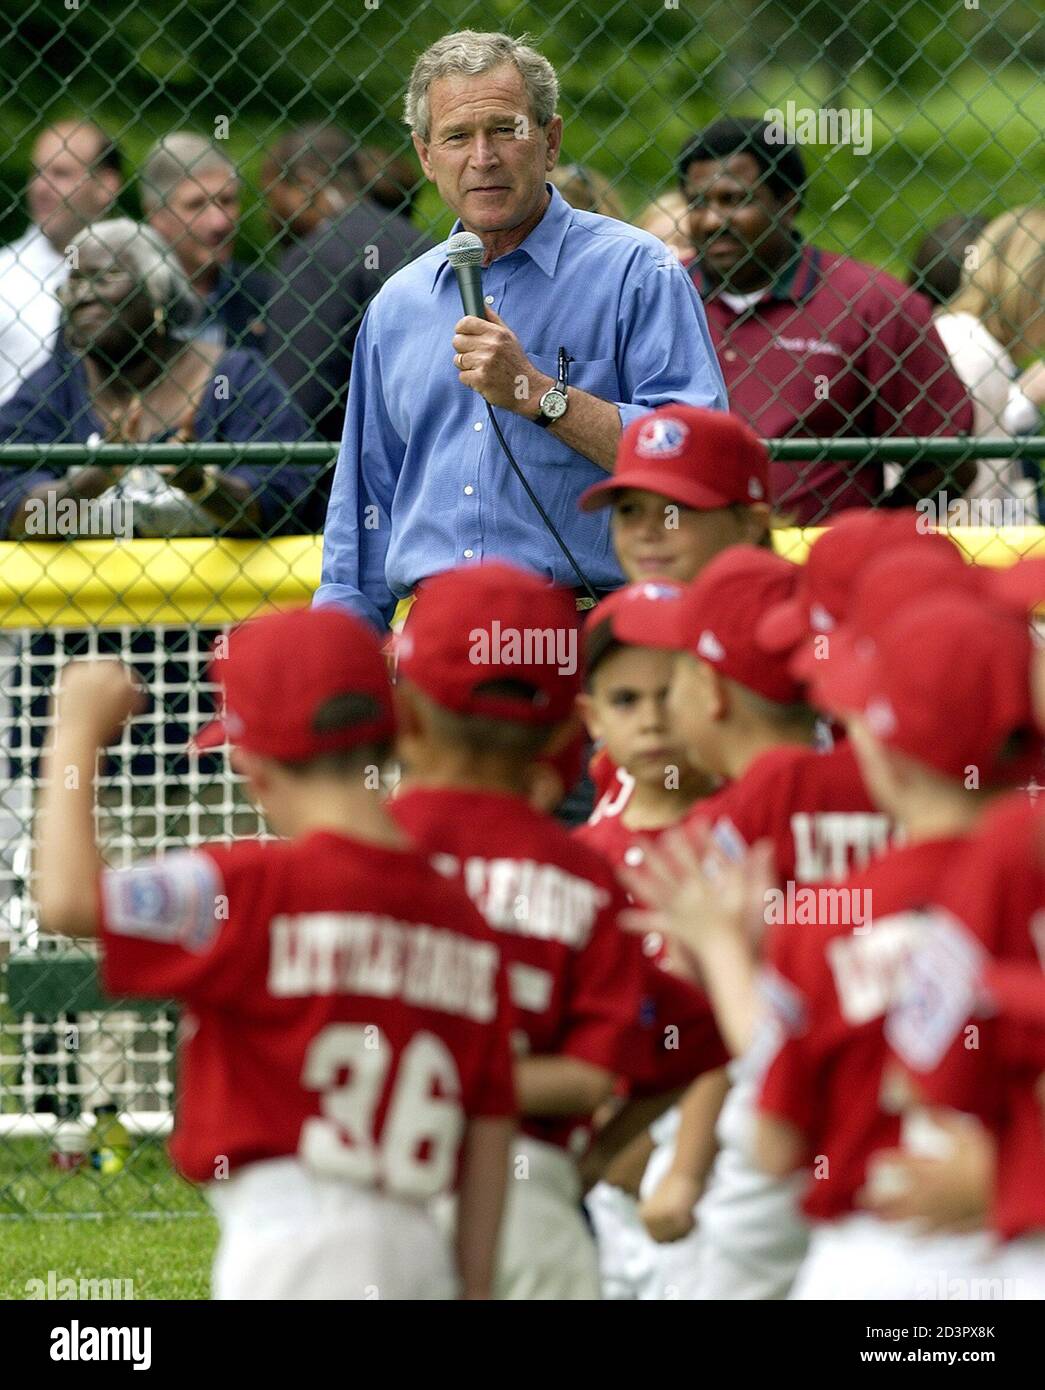 U.S. President George W. Bush welcomes the Cherry Point Marine Corps Air Station Devil Dogs to the annual Tee Ball event on the South Lawn of the White House in Washington, D.C., June 13, 2004. The President and First lady hosted the annual Tee Ball on the South Lawn after a busy week of events in the nation's capitol. REUTERS/Mannie Garcia  MG Stock Photo